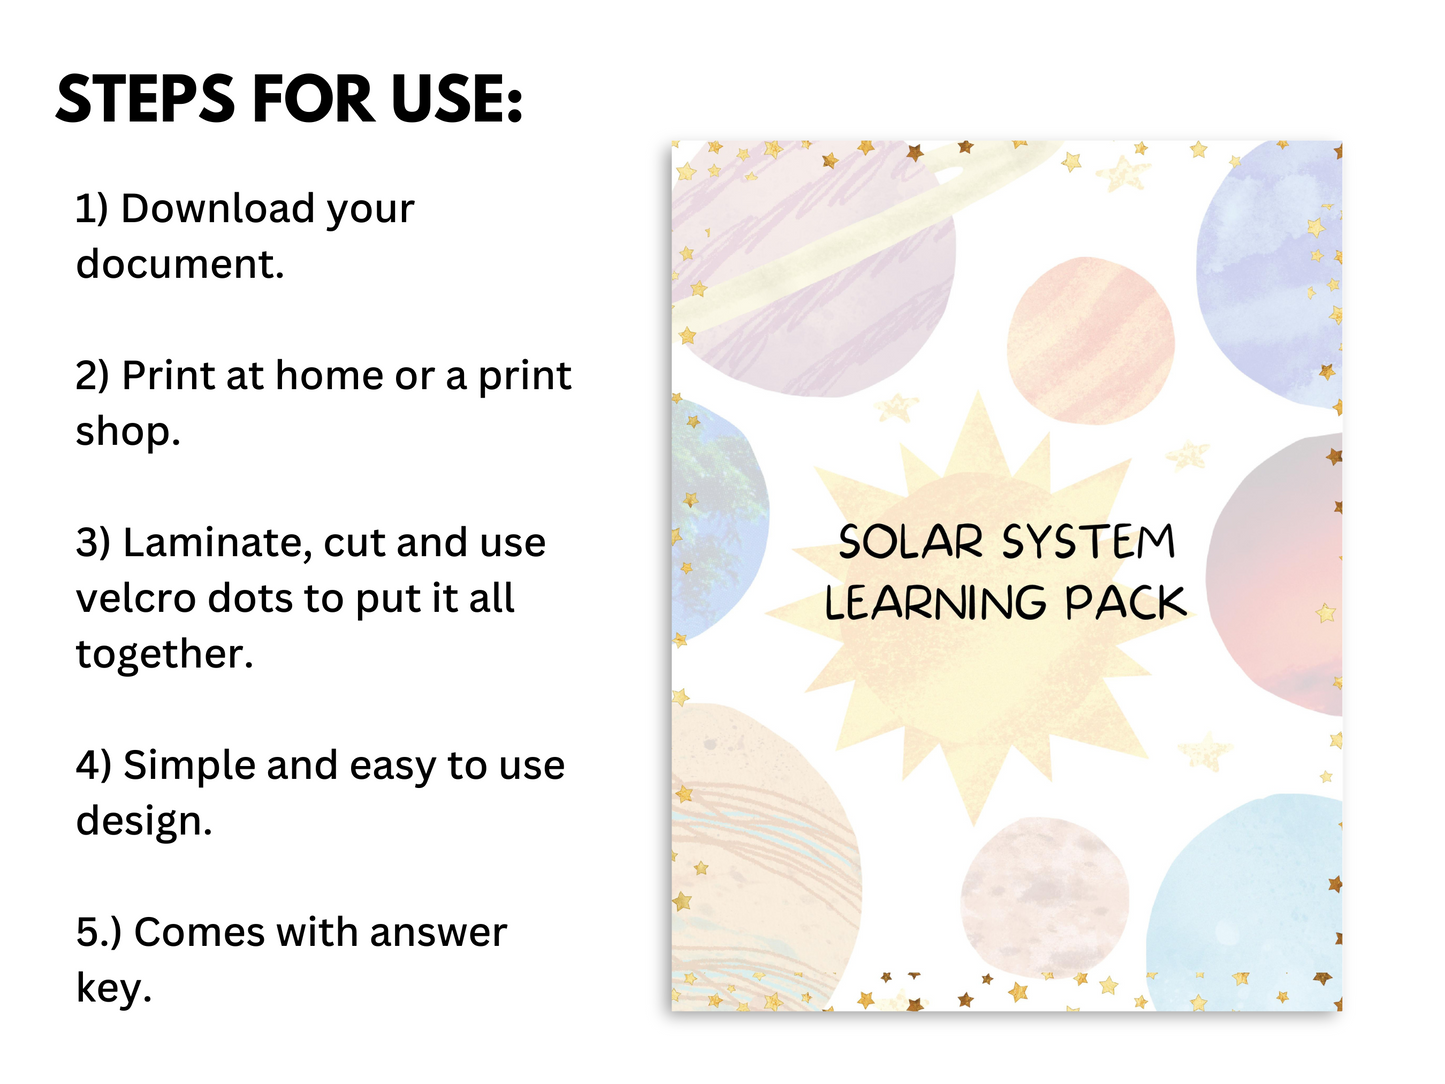 five steps of how to use with solar system learning pack cover page shown.